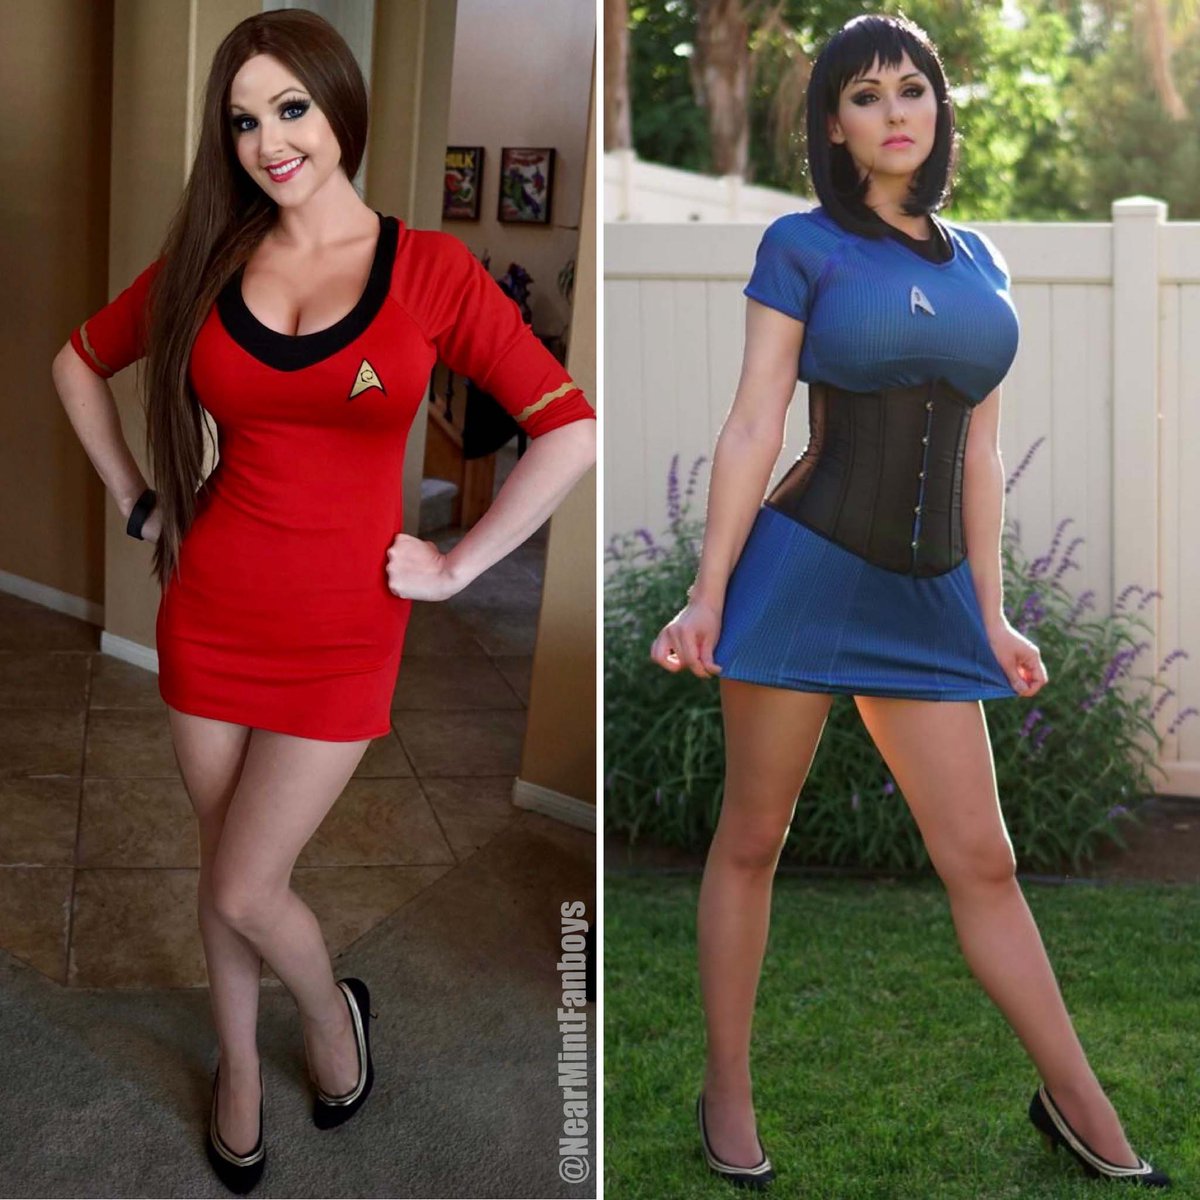 Quick, before your Rate Limit is Exceeded!
Red or Blue?!

#AngieGriffin #StarTrek 
#StarTrekCosplay #RIPTwitter 
#GoodbyeTwitter #StarTrekSNW 
@AngieMGriffin #CosplayBabe
#RateLimitExceeded